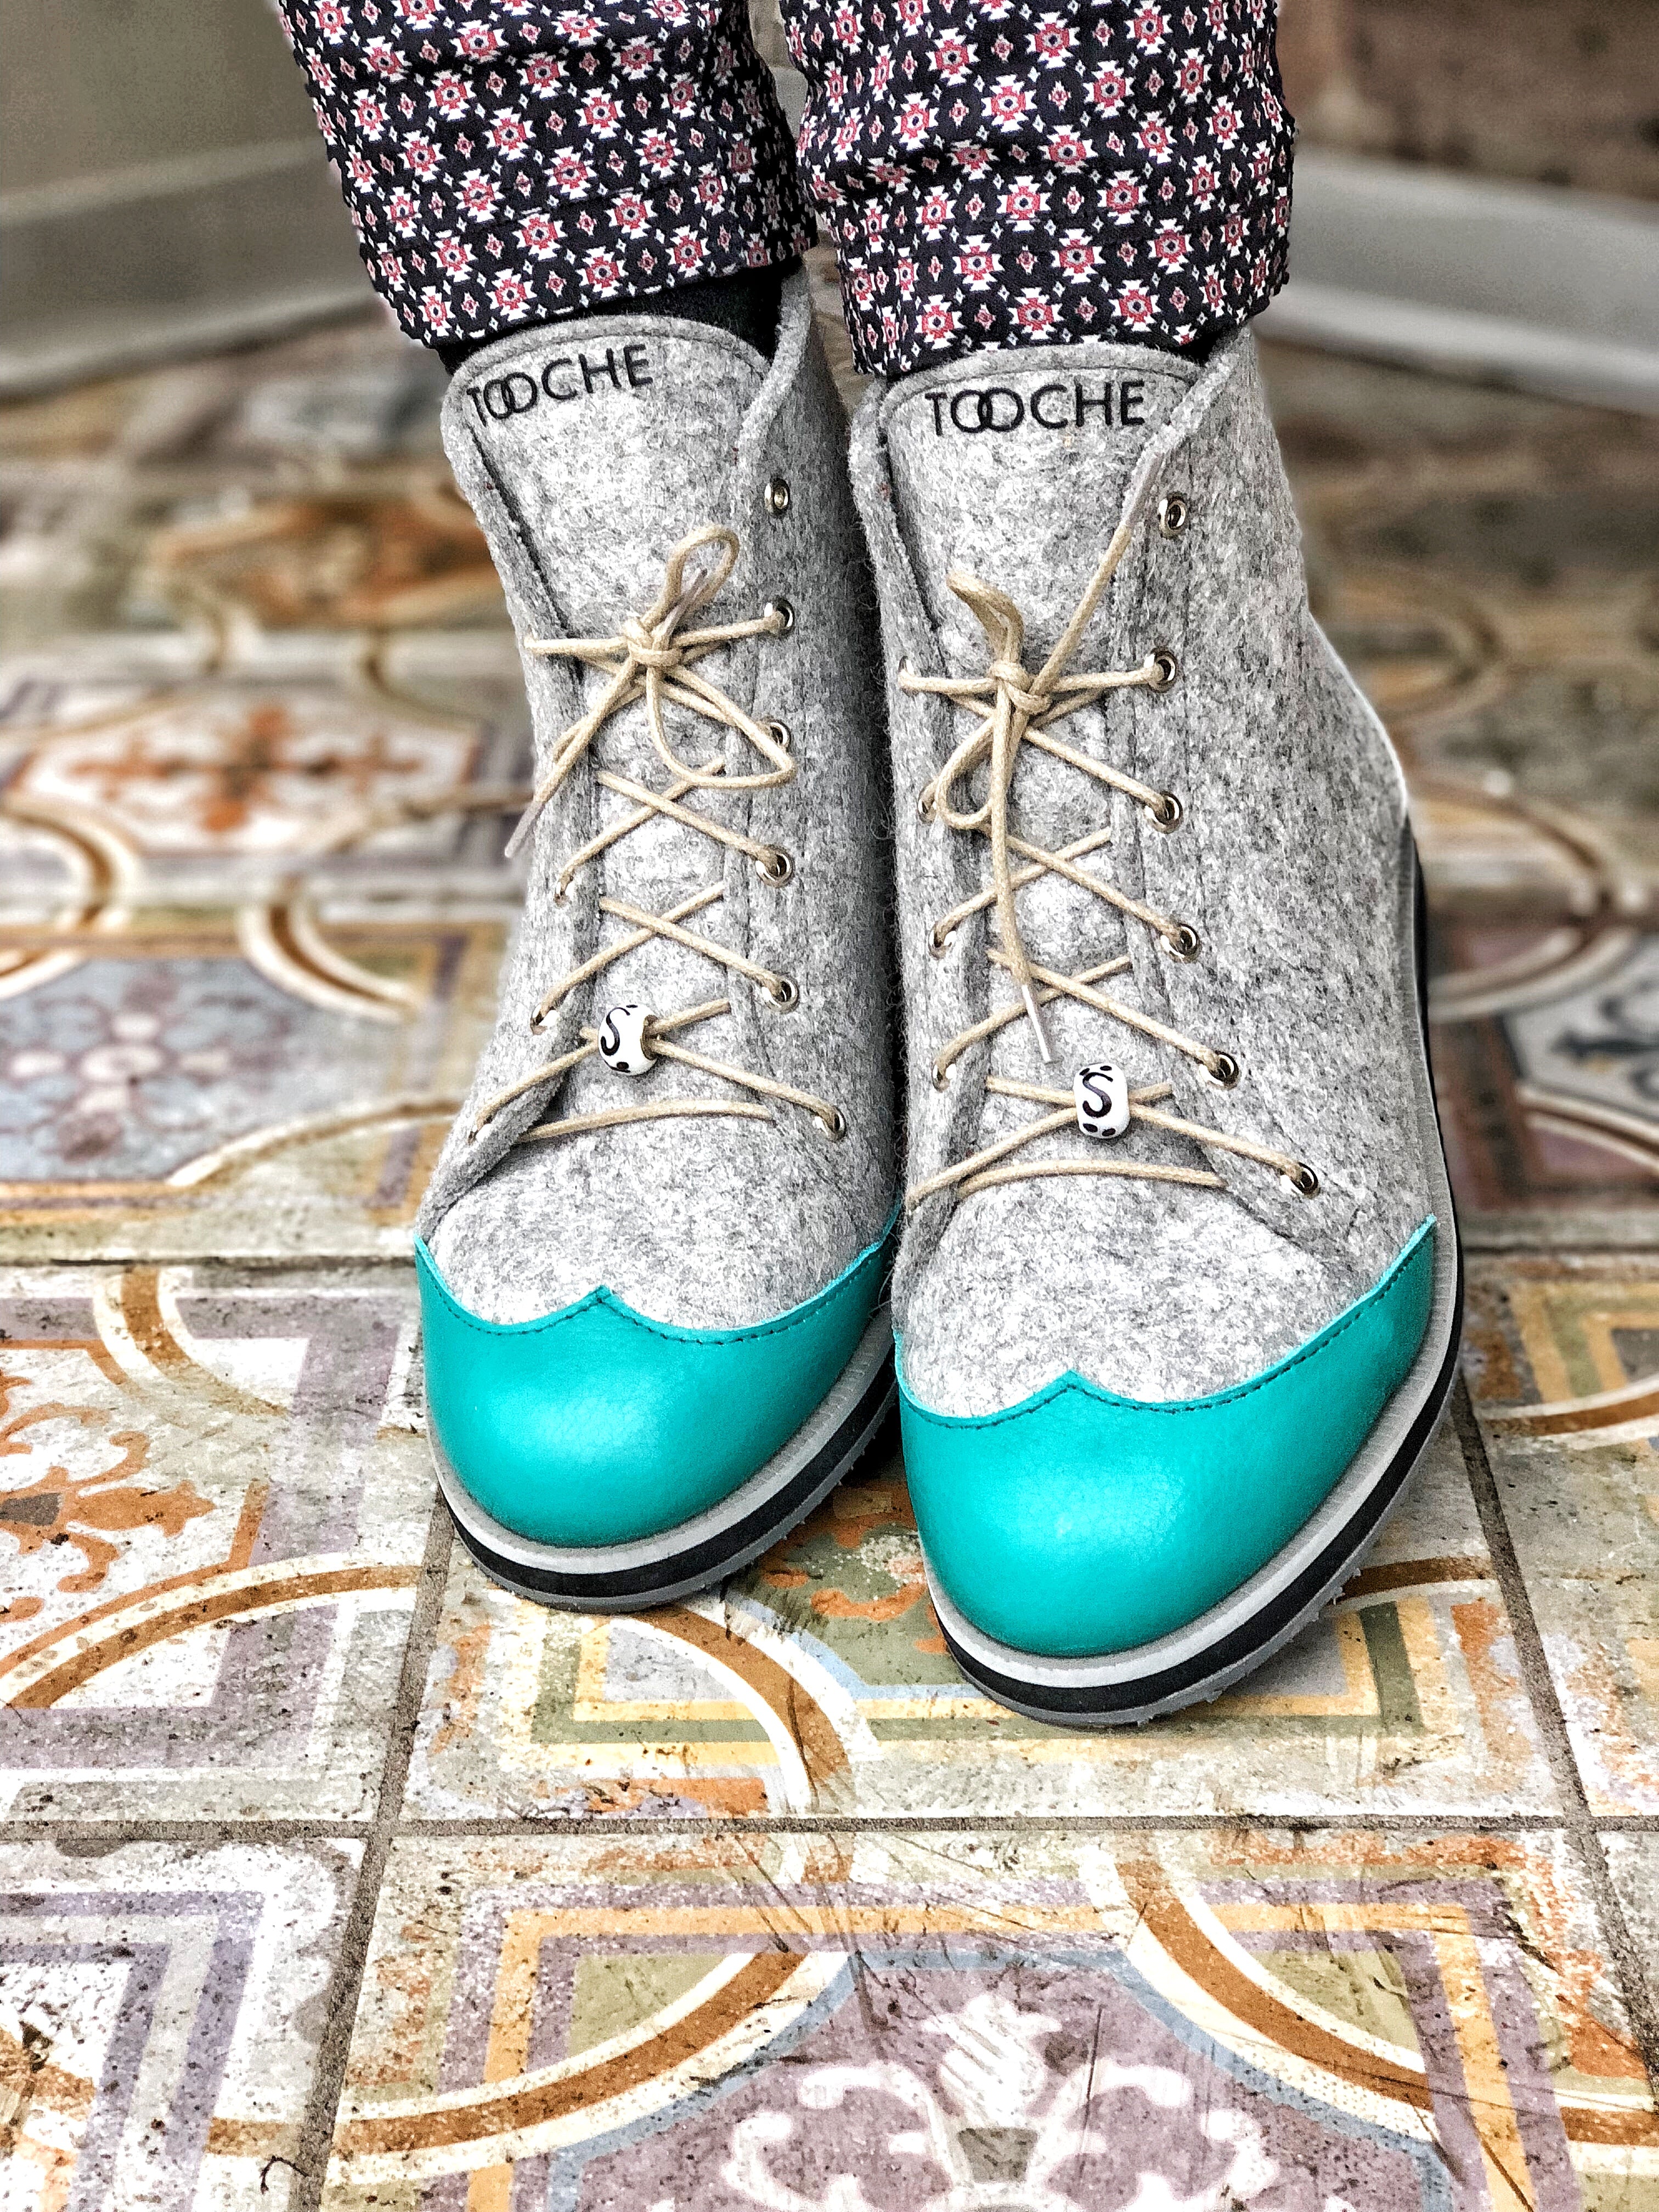 Oxford turquoise shoes